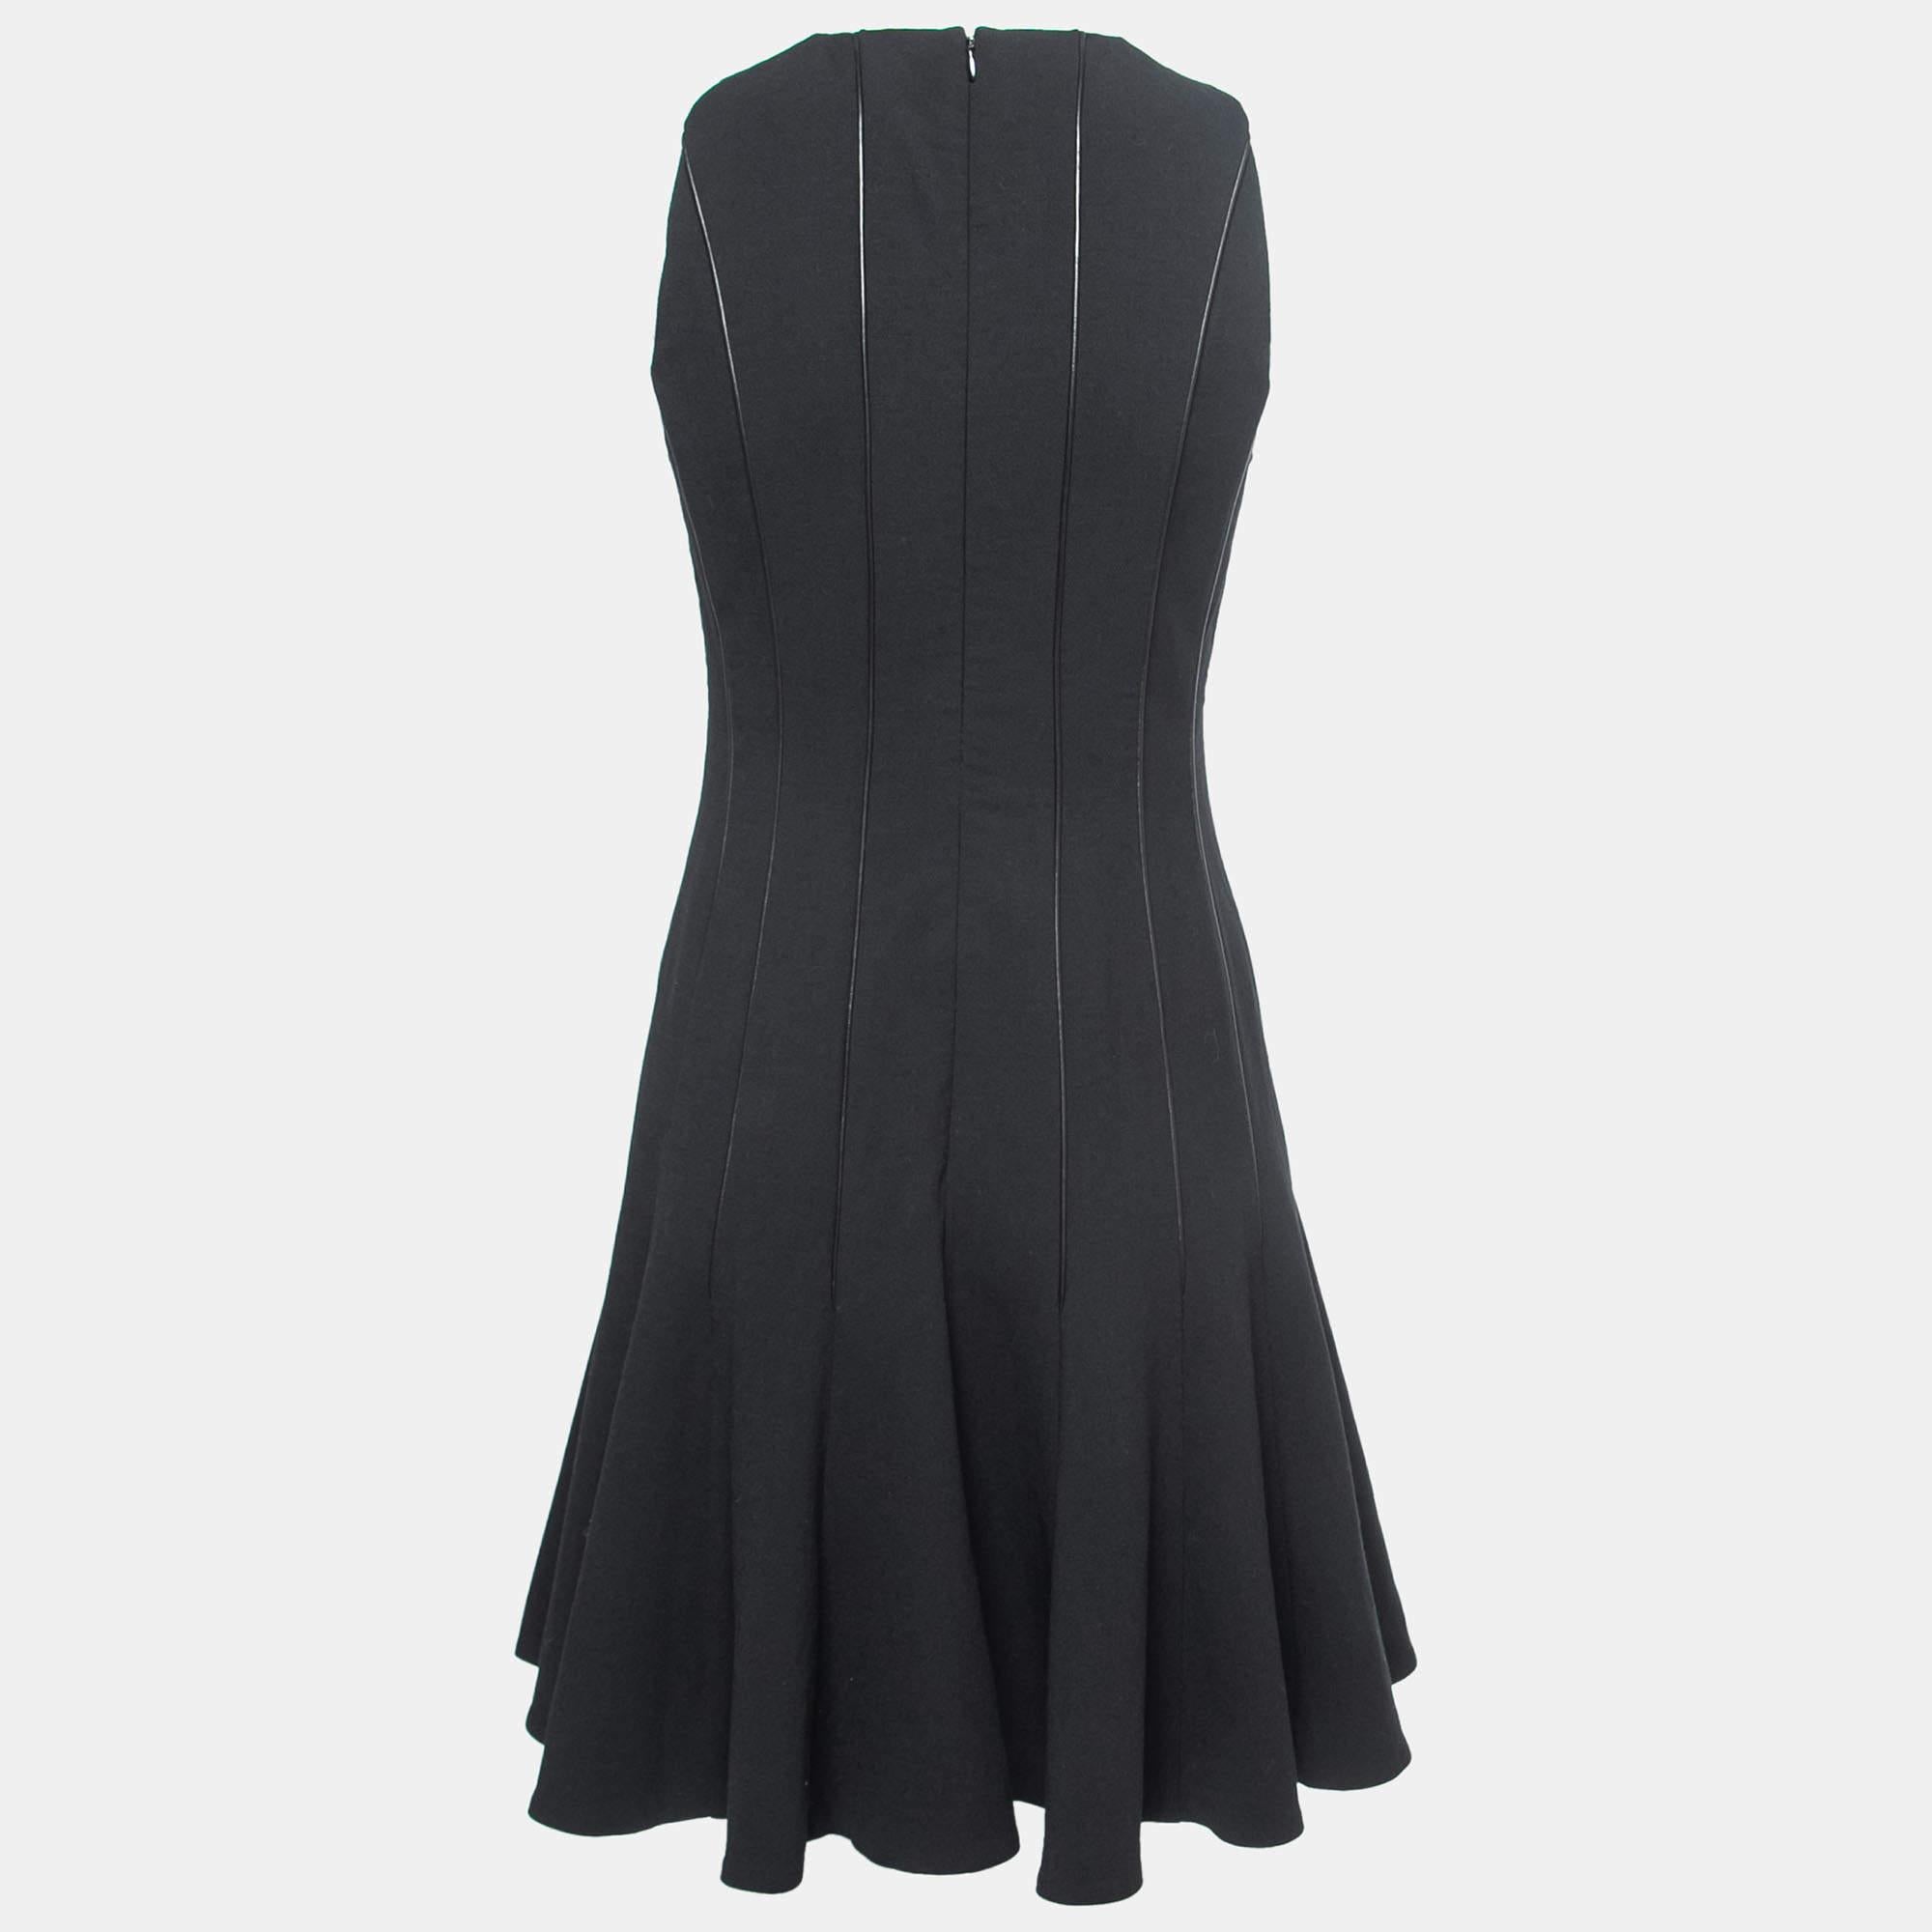 Effortlessly made into a chic design, this Ralph Lauren dress is easy to wear and easy to accessorize. Tailored beautifully, the dress has a simple neckline, back zipper, and flared skirt. It is sure to remain a favorite season after